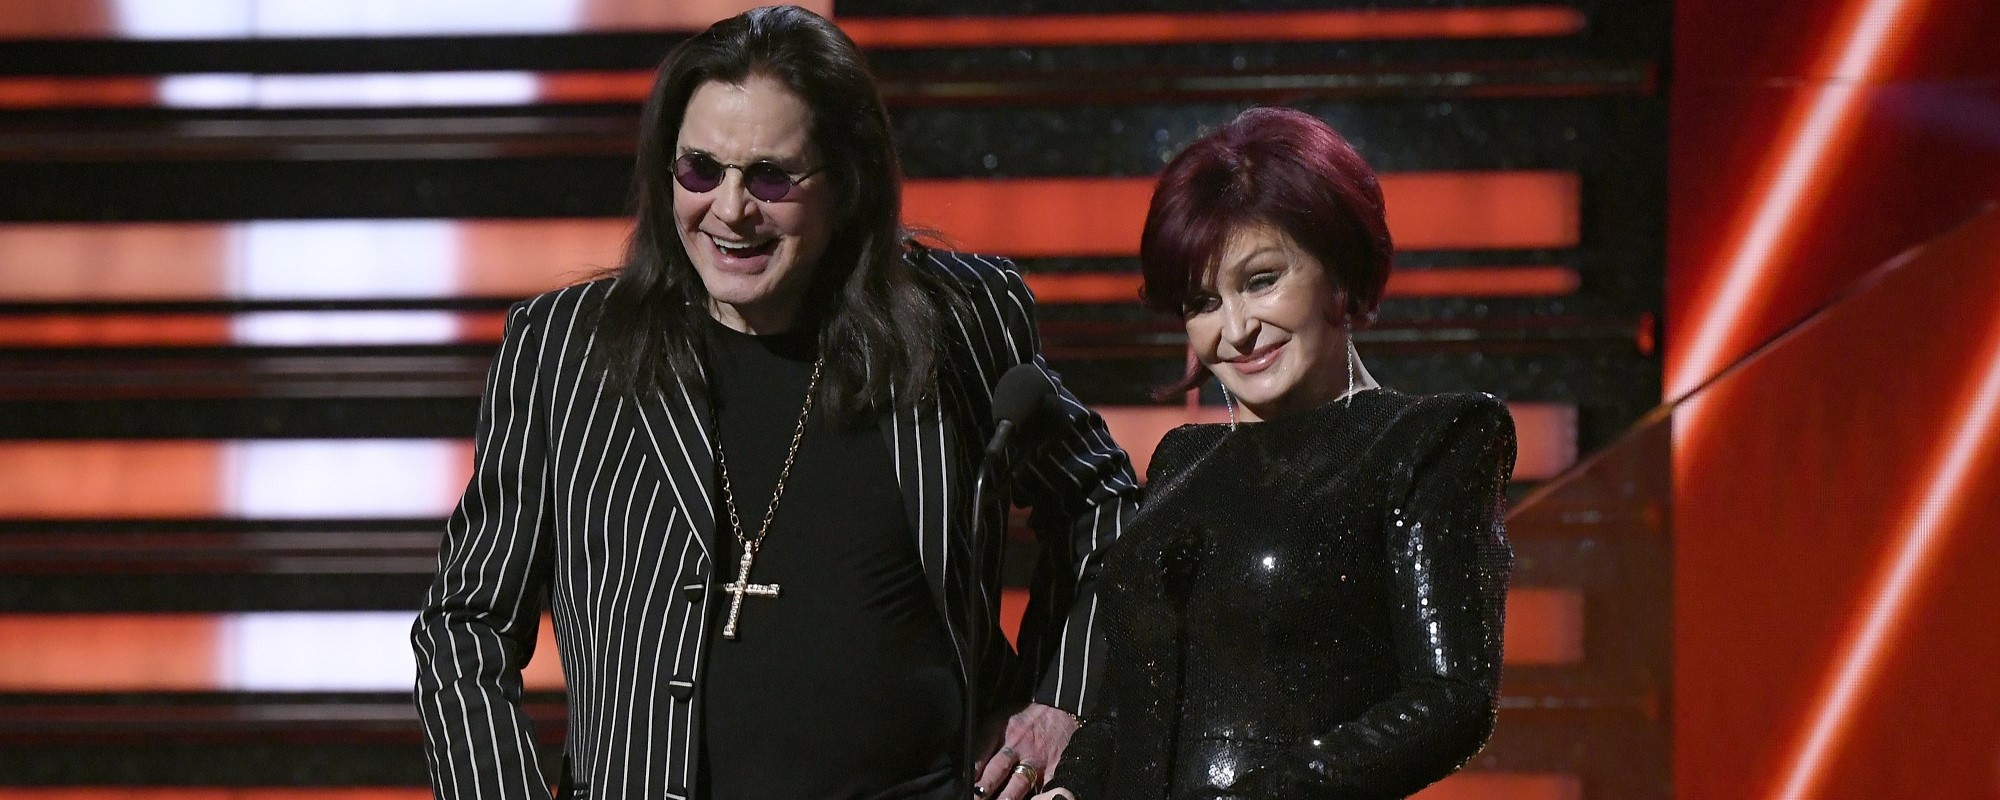 Ozzy Osbourne’s Wife Explains Why Their Planned Return to the U.K. Has Been Delayed; Source Claims Ozzy’s Unsure About the Move